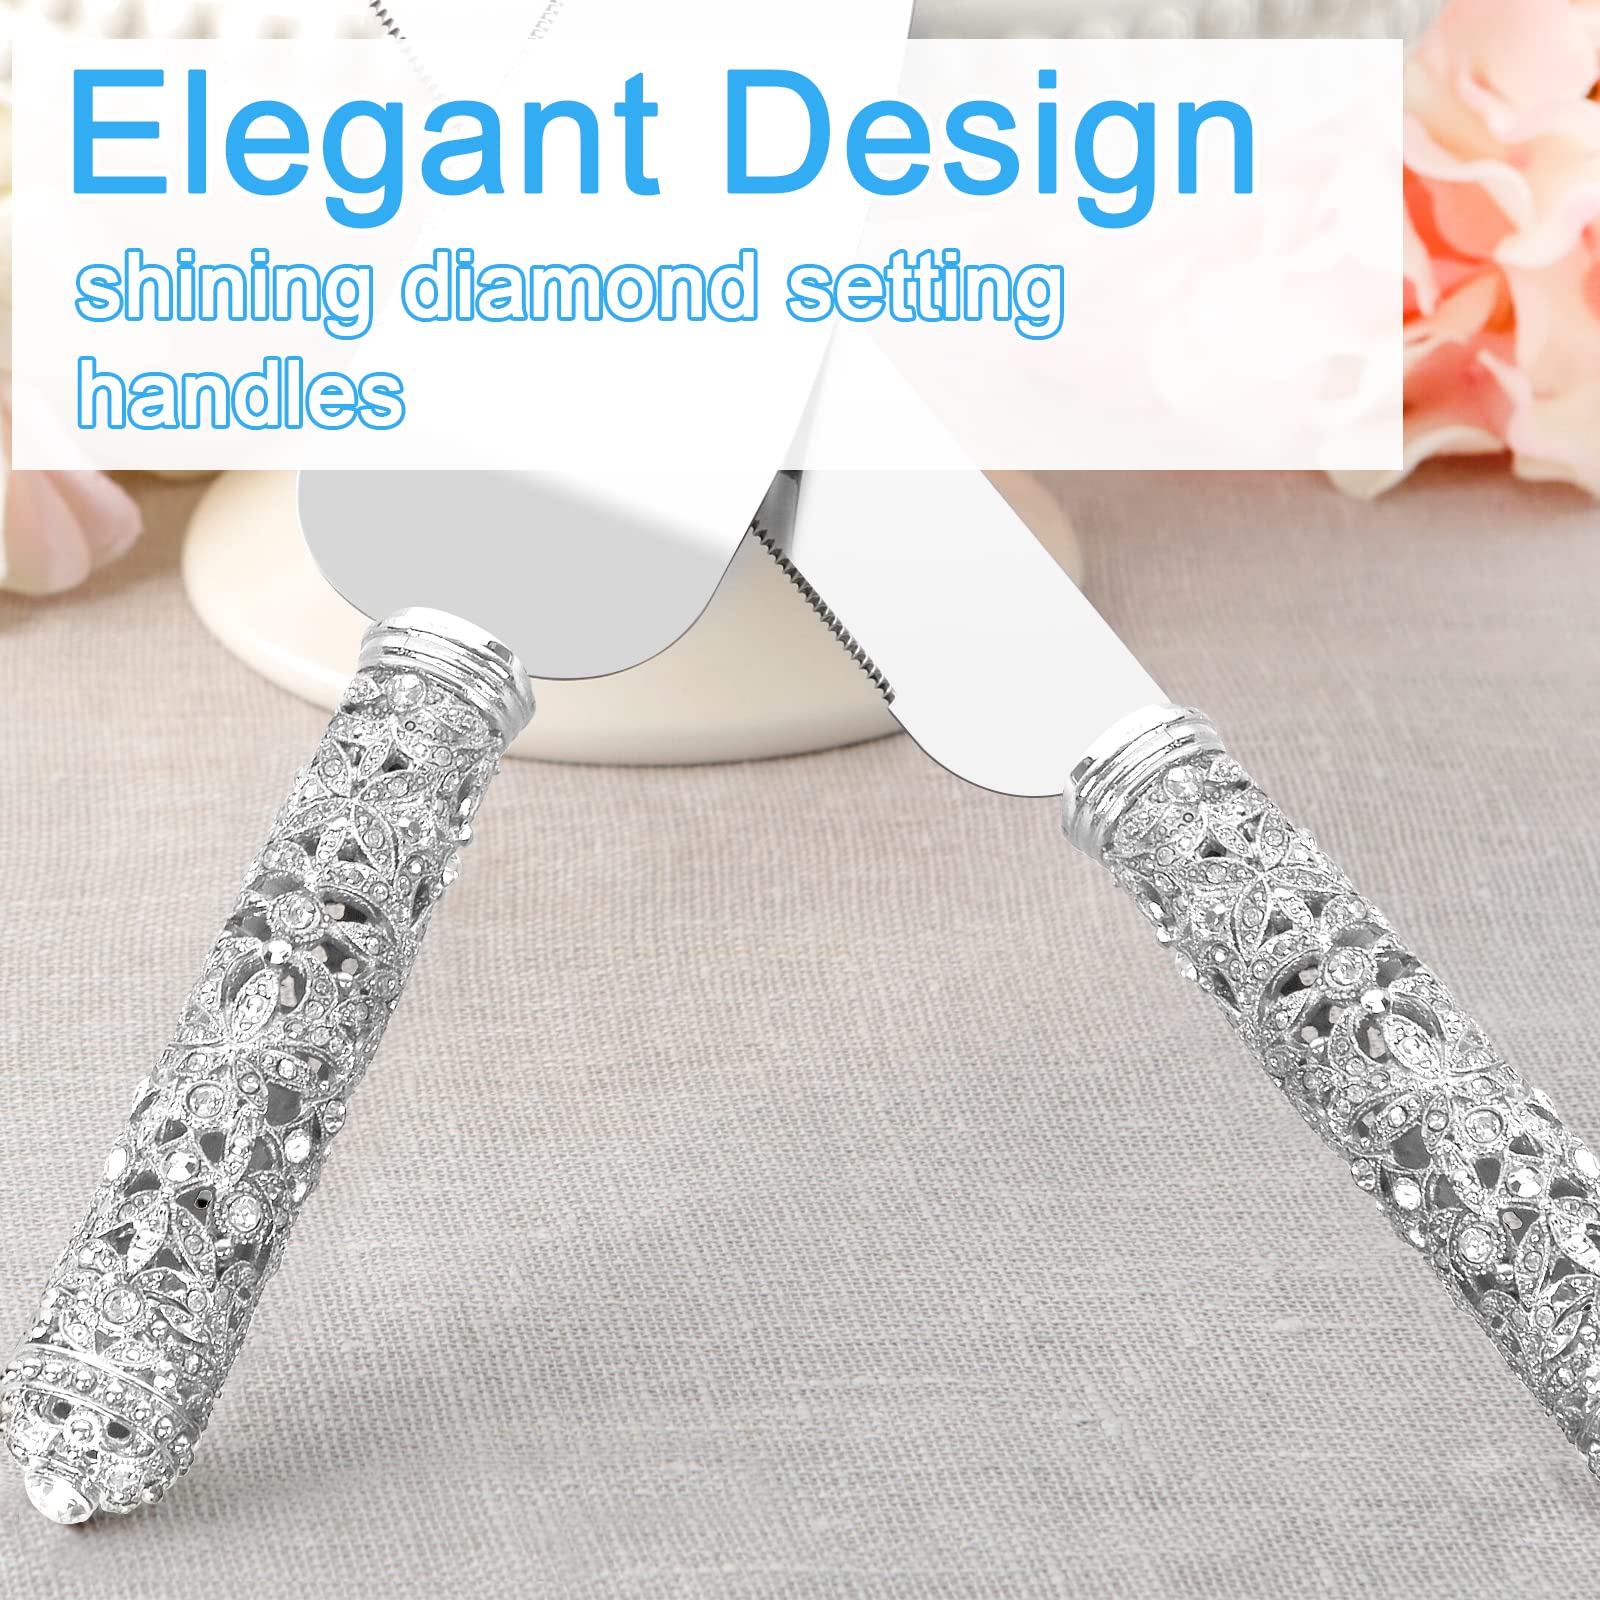 Jozen Gift Wedding Cake Knife and Server Set - 2 Piece Dessert Set Metal Handle with Crystal Stones Decoration for Wedding, Anniversary Party Birthday Banquets and Gifts for Bride and Groom